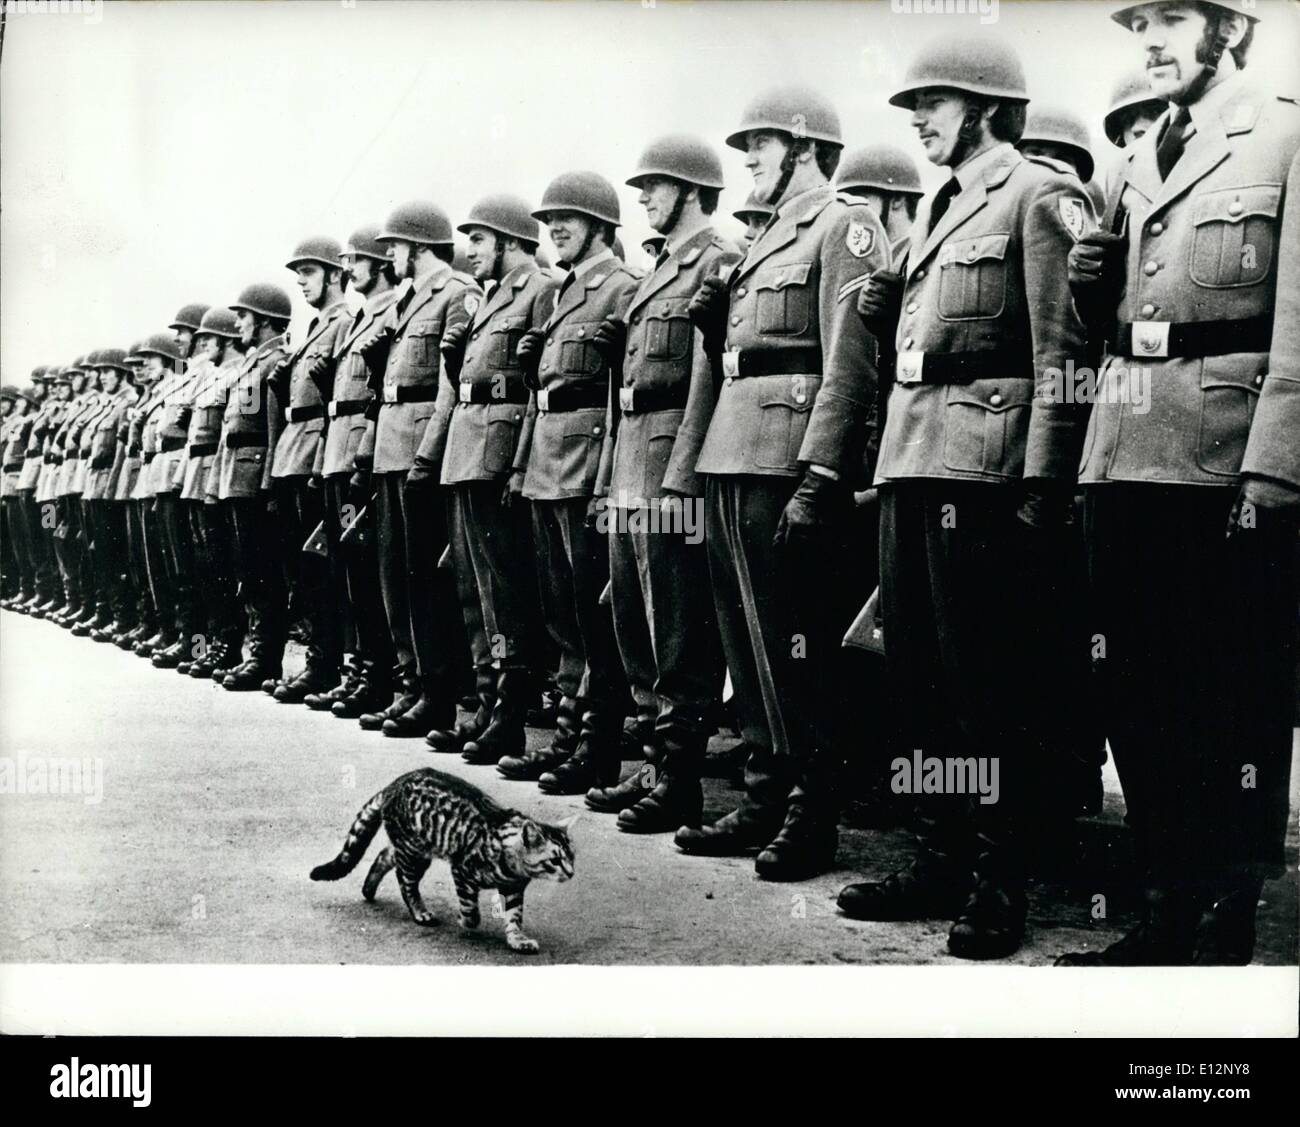 Feb. 24, 2012 - Who Is Inspecting US Now?: Most of these soldiers couldn't resist a smile when this cat decided to inspect them. They were waiting for the Mayor of Kassel-Niederzwehren (West Germany) to inspect them - but the cat got in first! Stock Photo